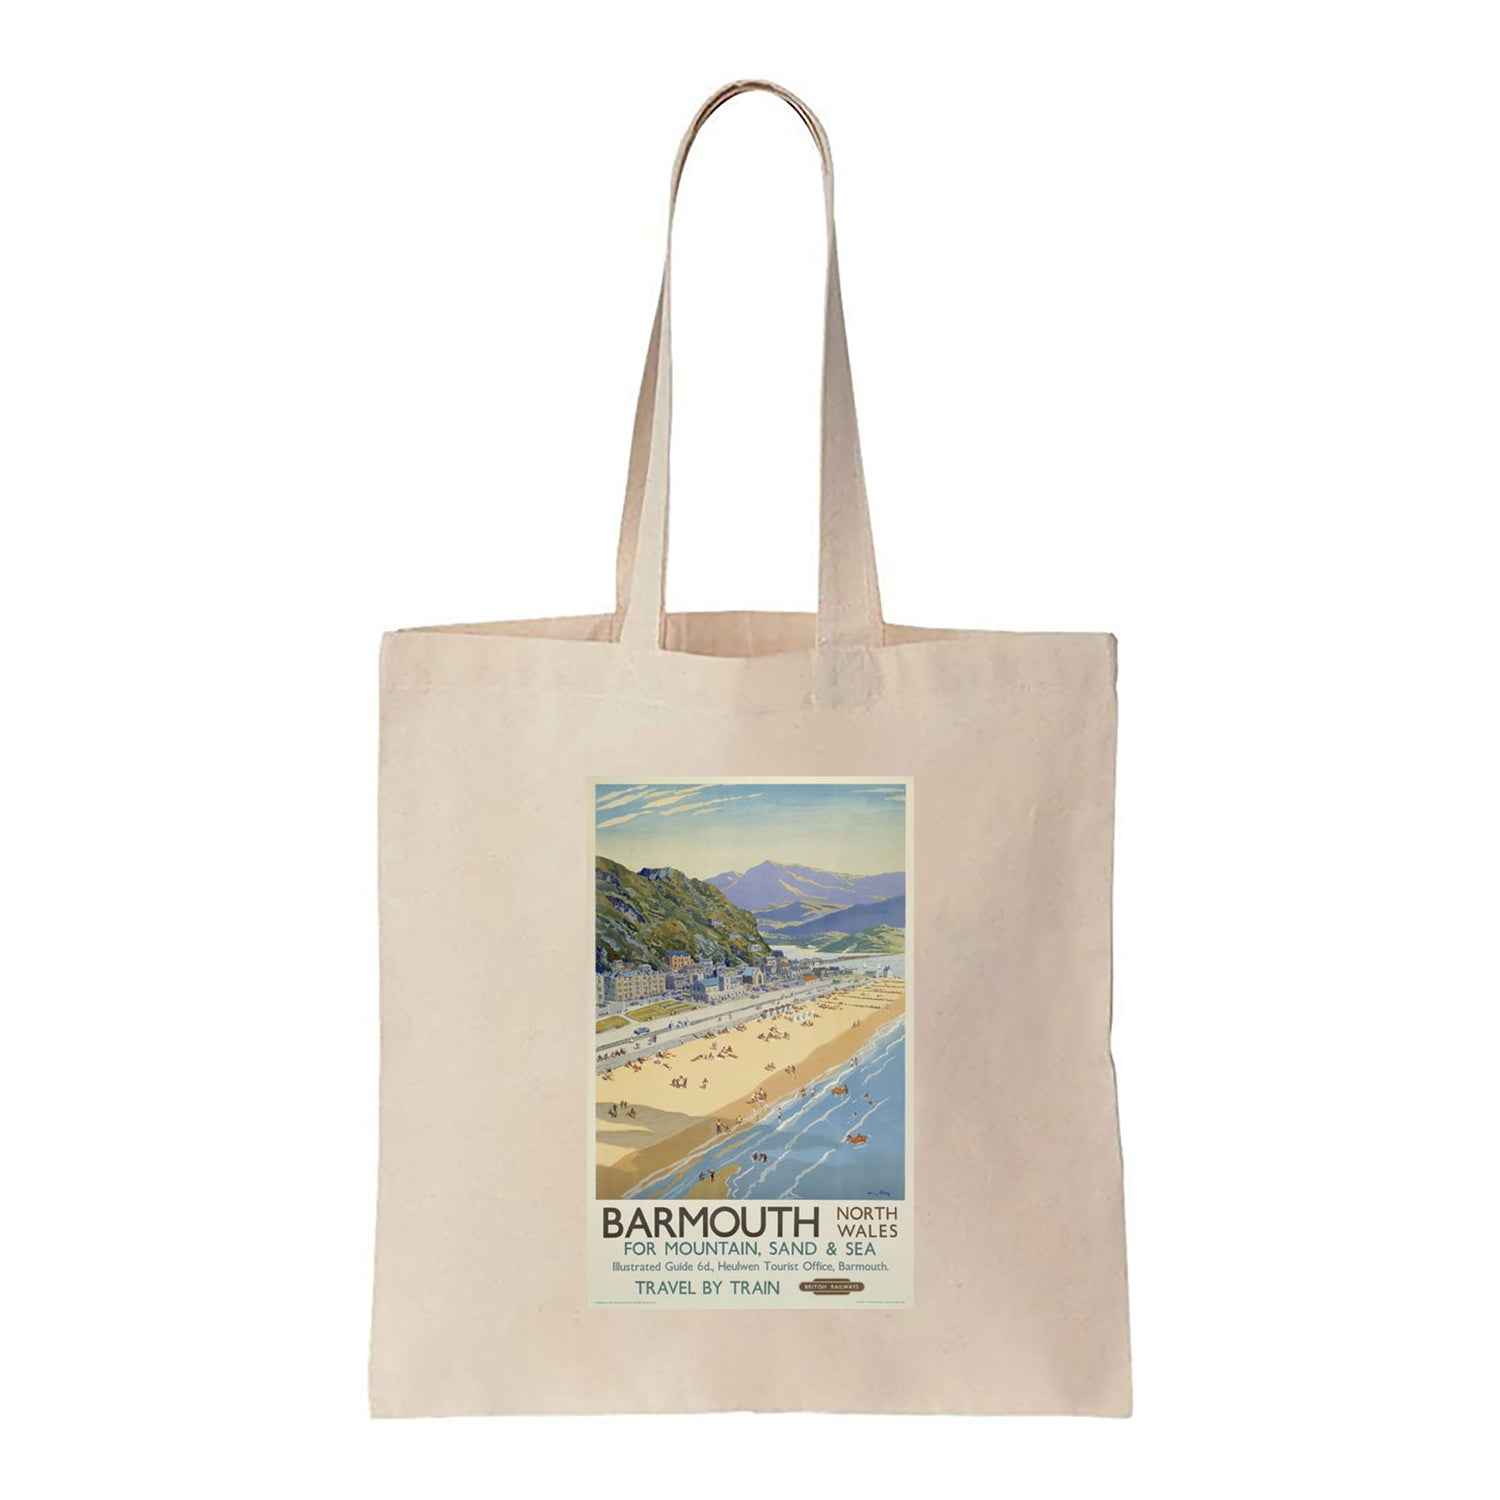 Barmouth, North Wales for Mountain, Sand and Sea - Canvas Tote Bag